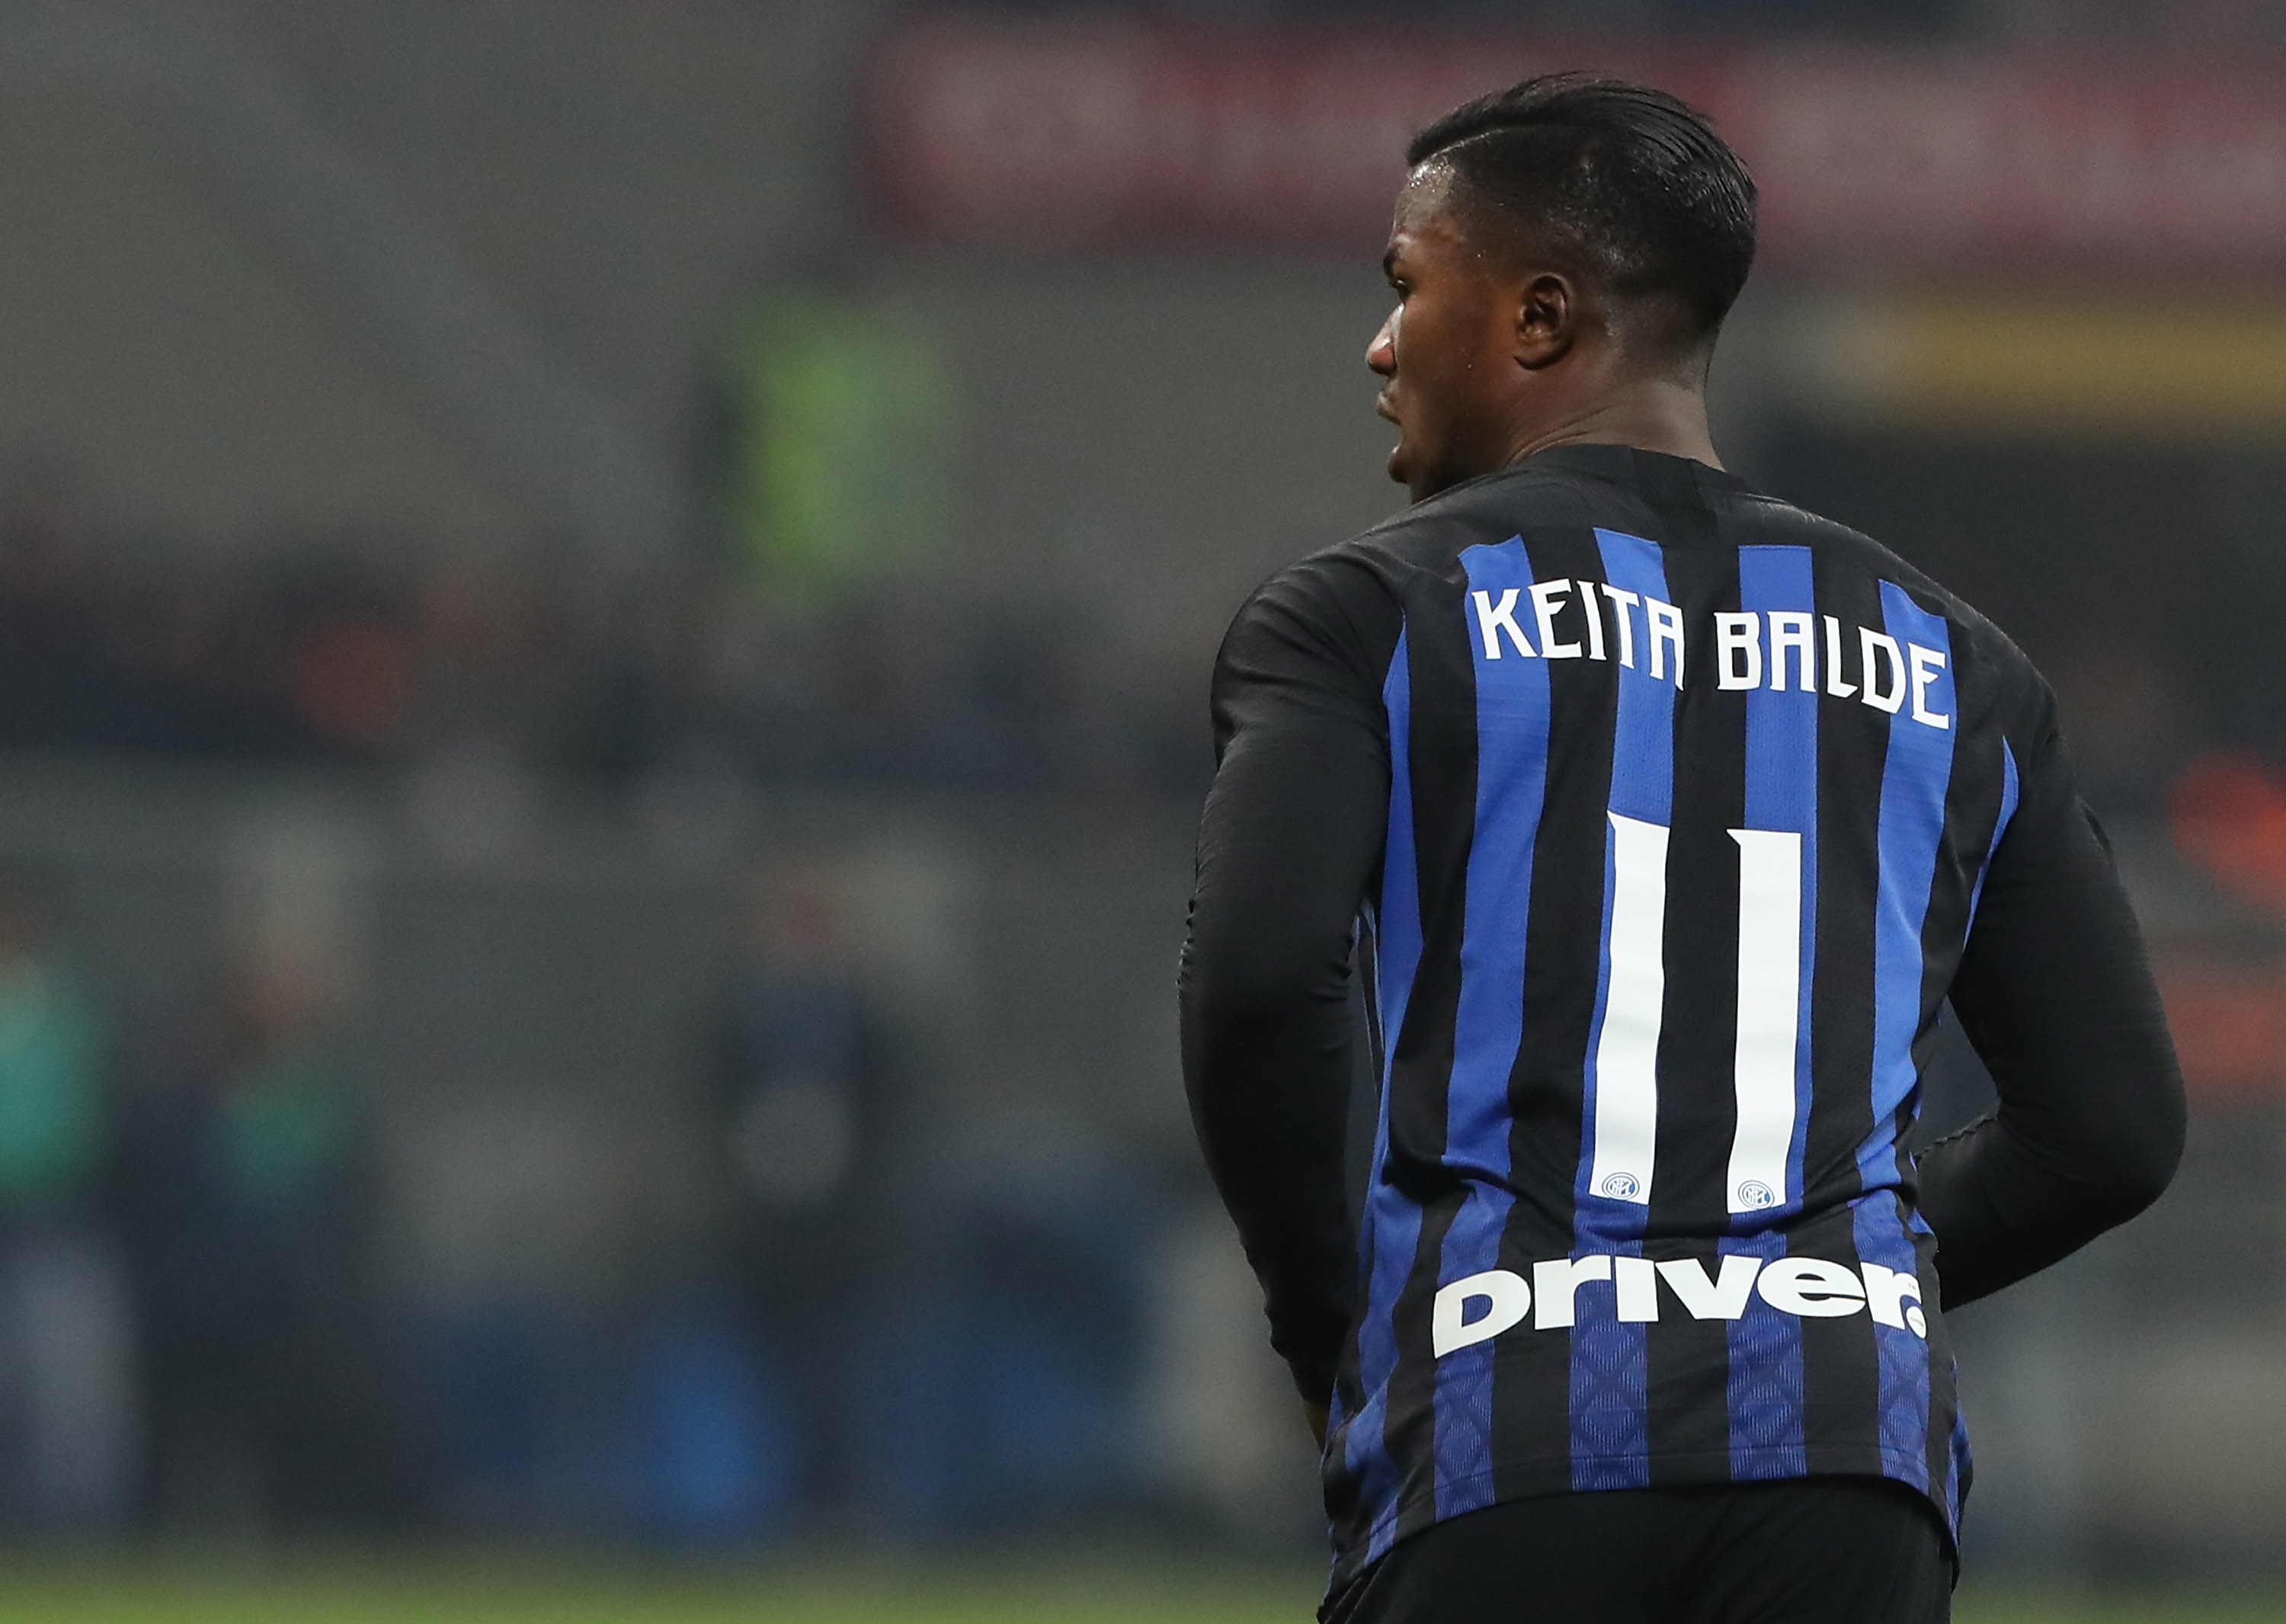 MILAN, ITALY - DECEMBER 15:  Balte Keita of FC Internazionale looks on during the Serie A match between FC Internazionale and Udinese at Stadio Giuseppe Meazza on December 16, 2018 in Milan, Italy.  (Photo by Marco Luzzani - Inter/Inter via Getty Images)